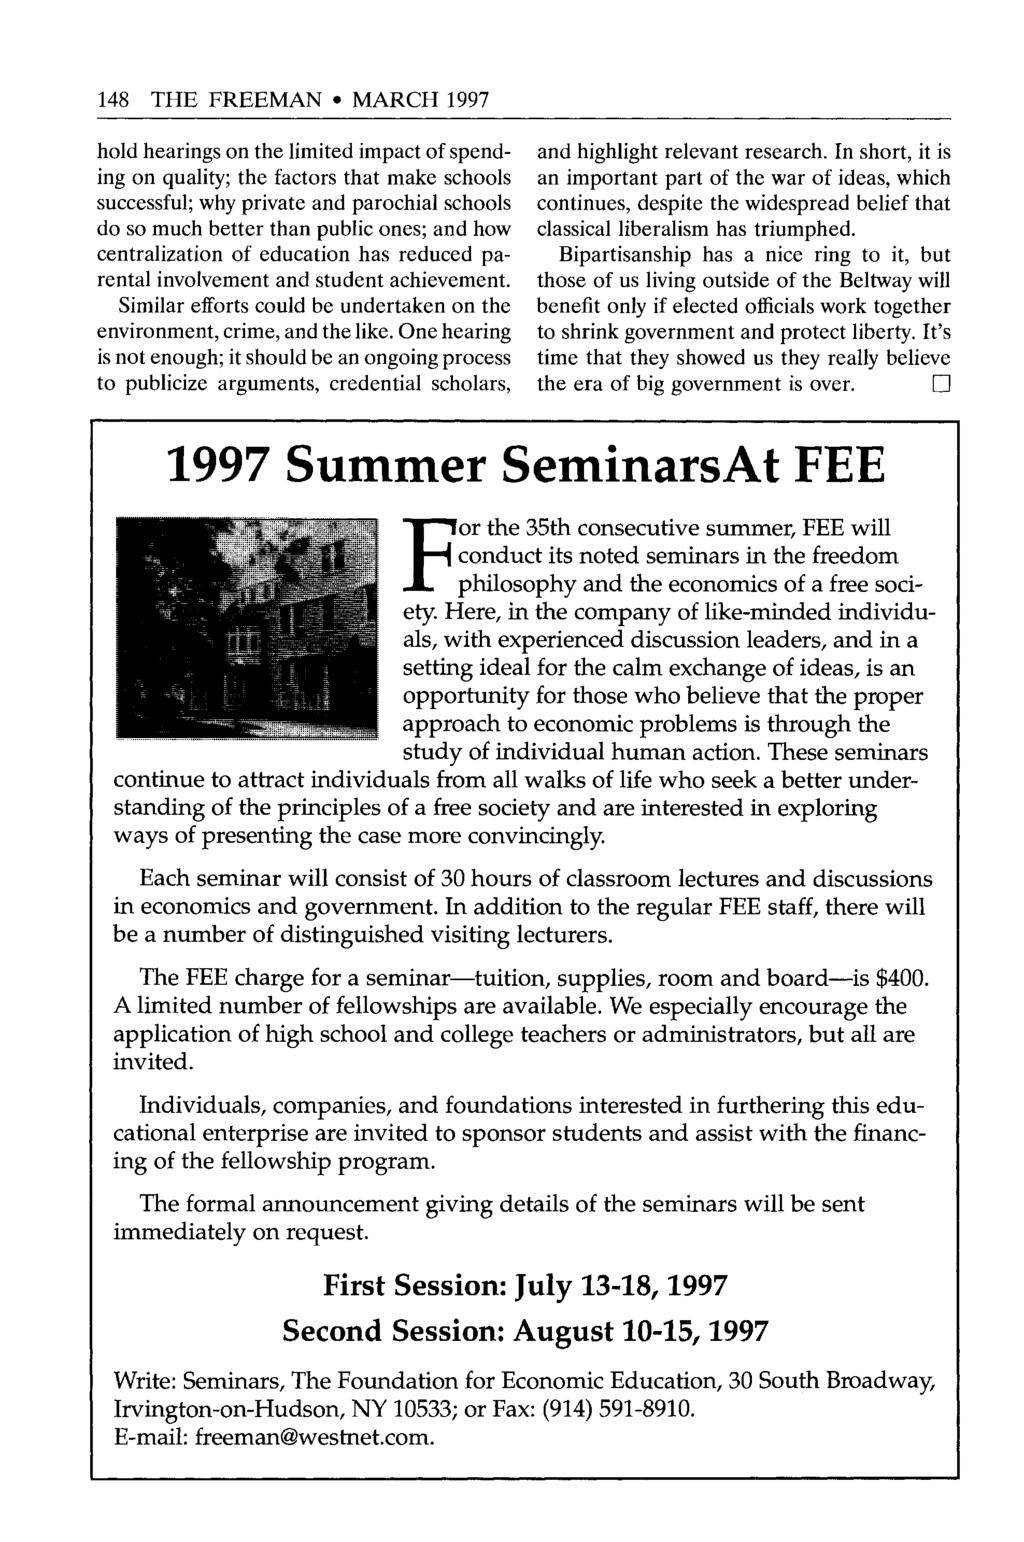 148 THE FREEMAN MARCH 1997 hold hearings on the limited impact of spending on quality; the factors that make schools successful; why private and parochial schools do so much better than public ones;